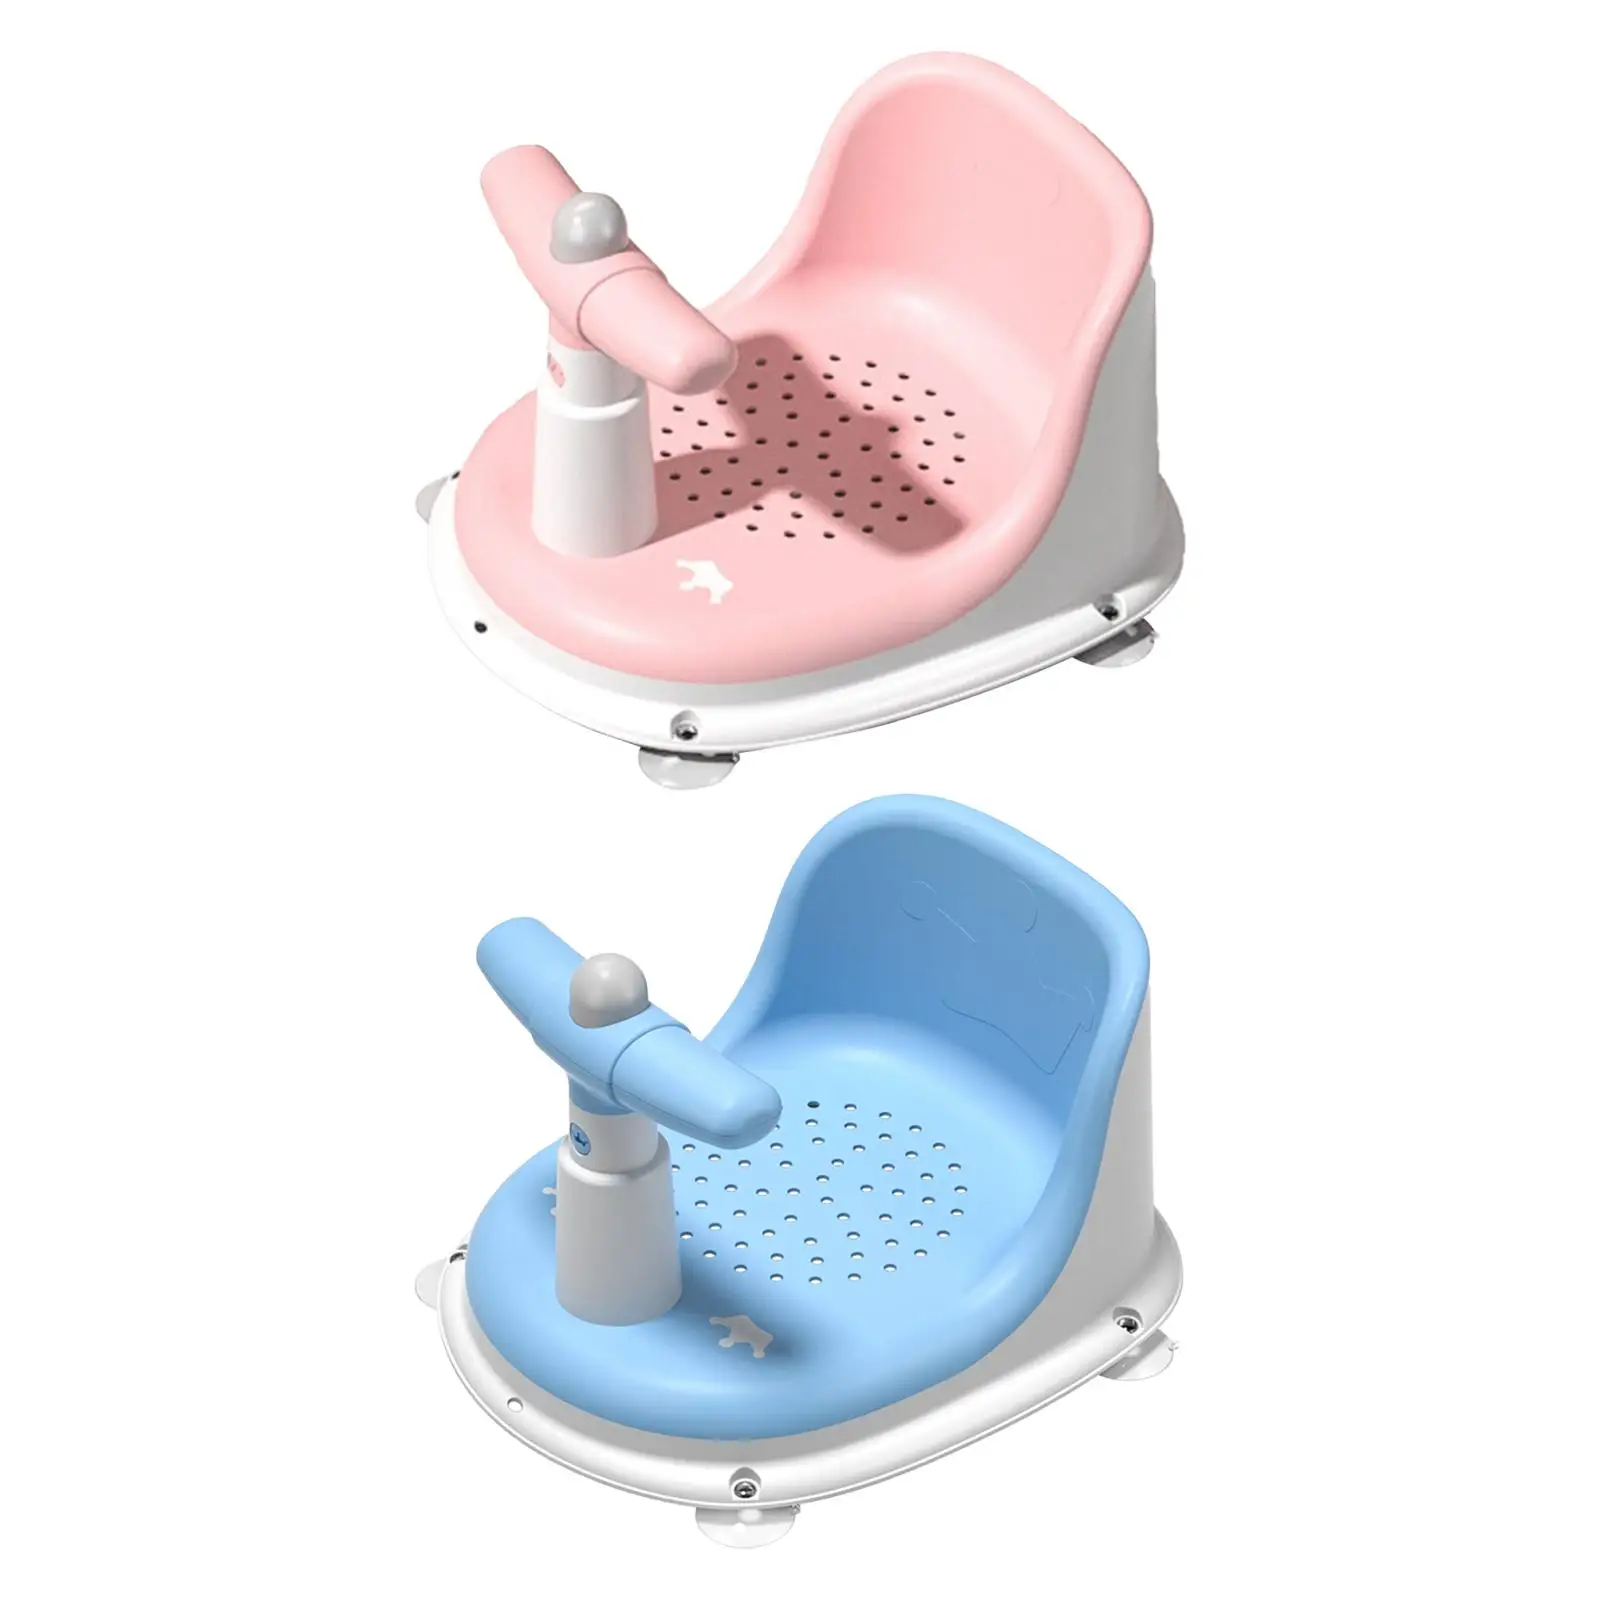 Baby Bath Seat with Secure Suction Cups Stable Soft Mat Hanging for Home